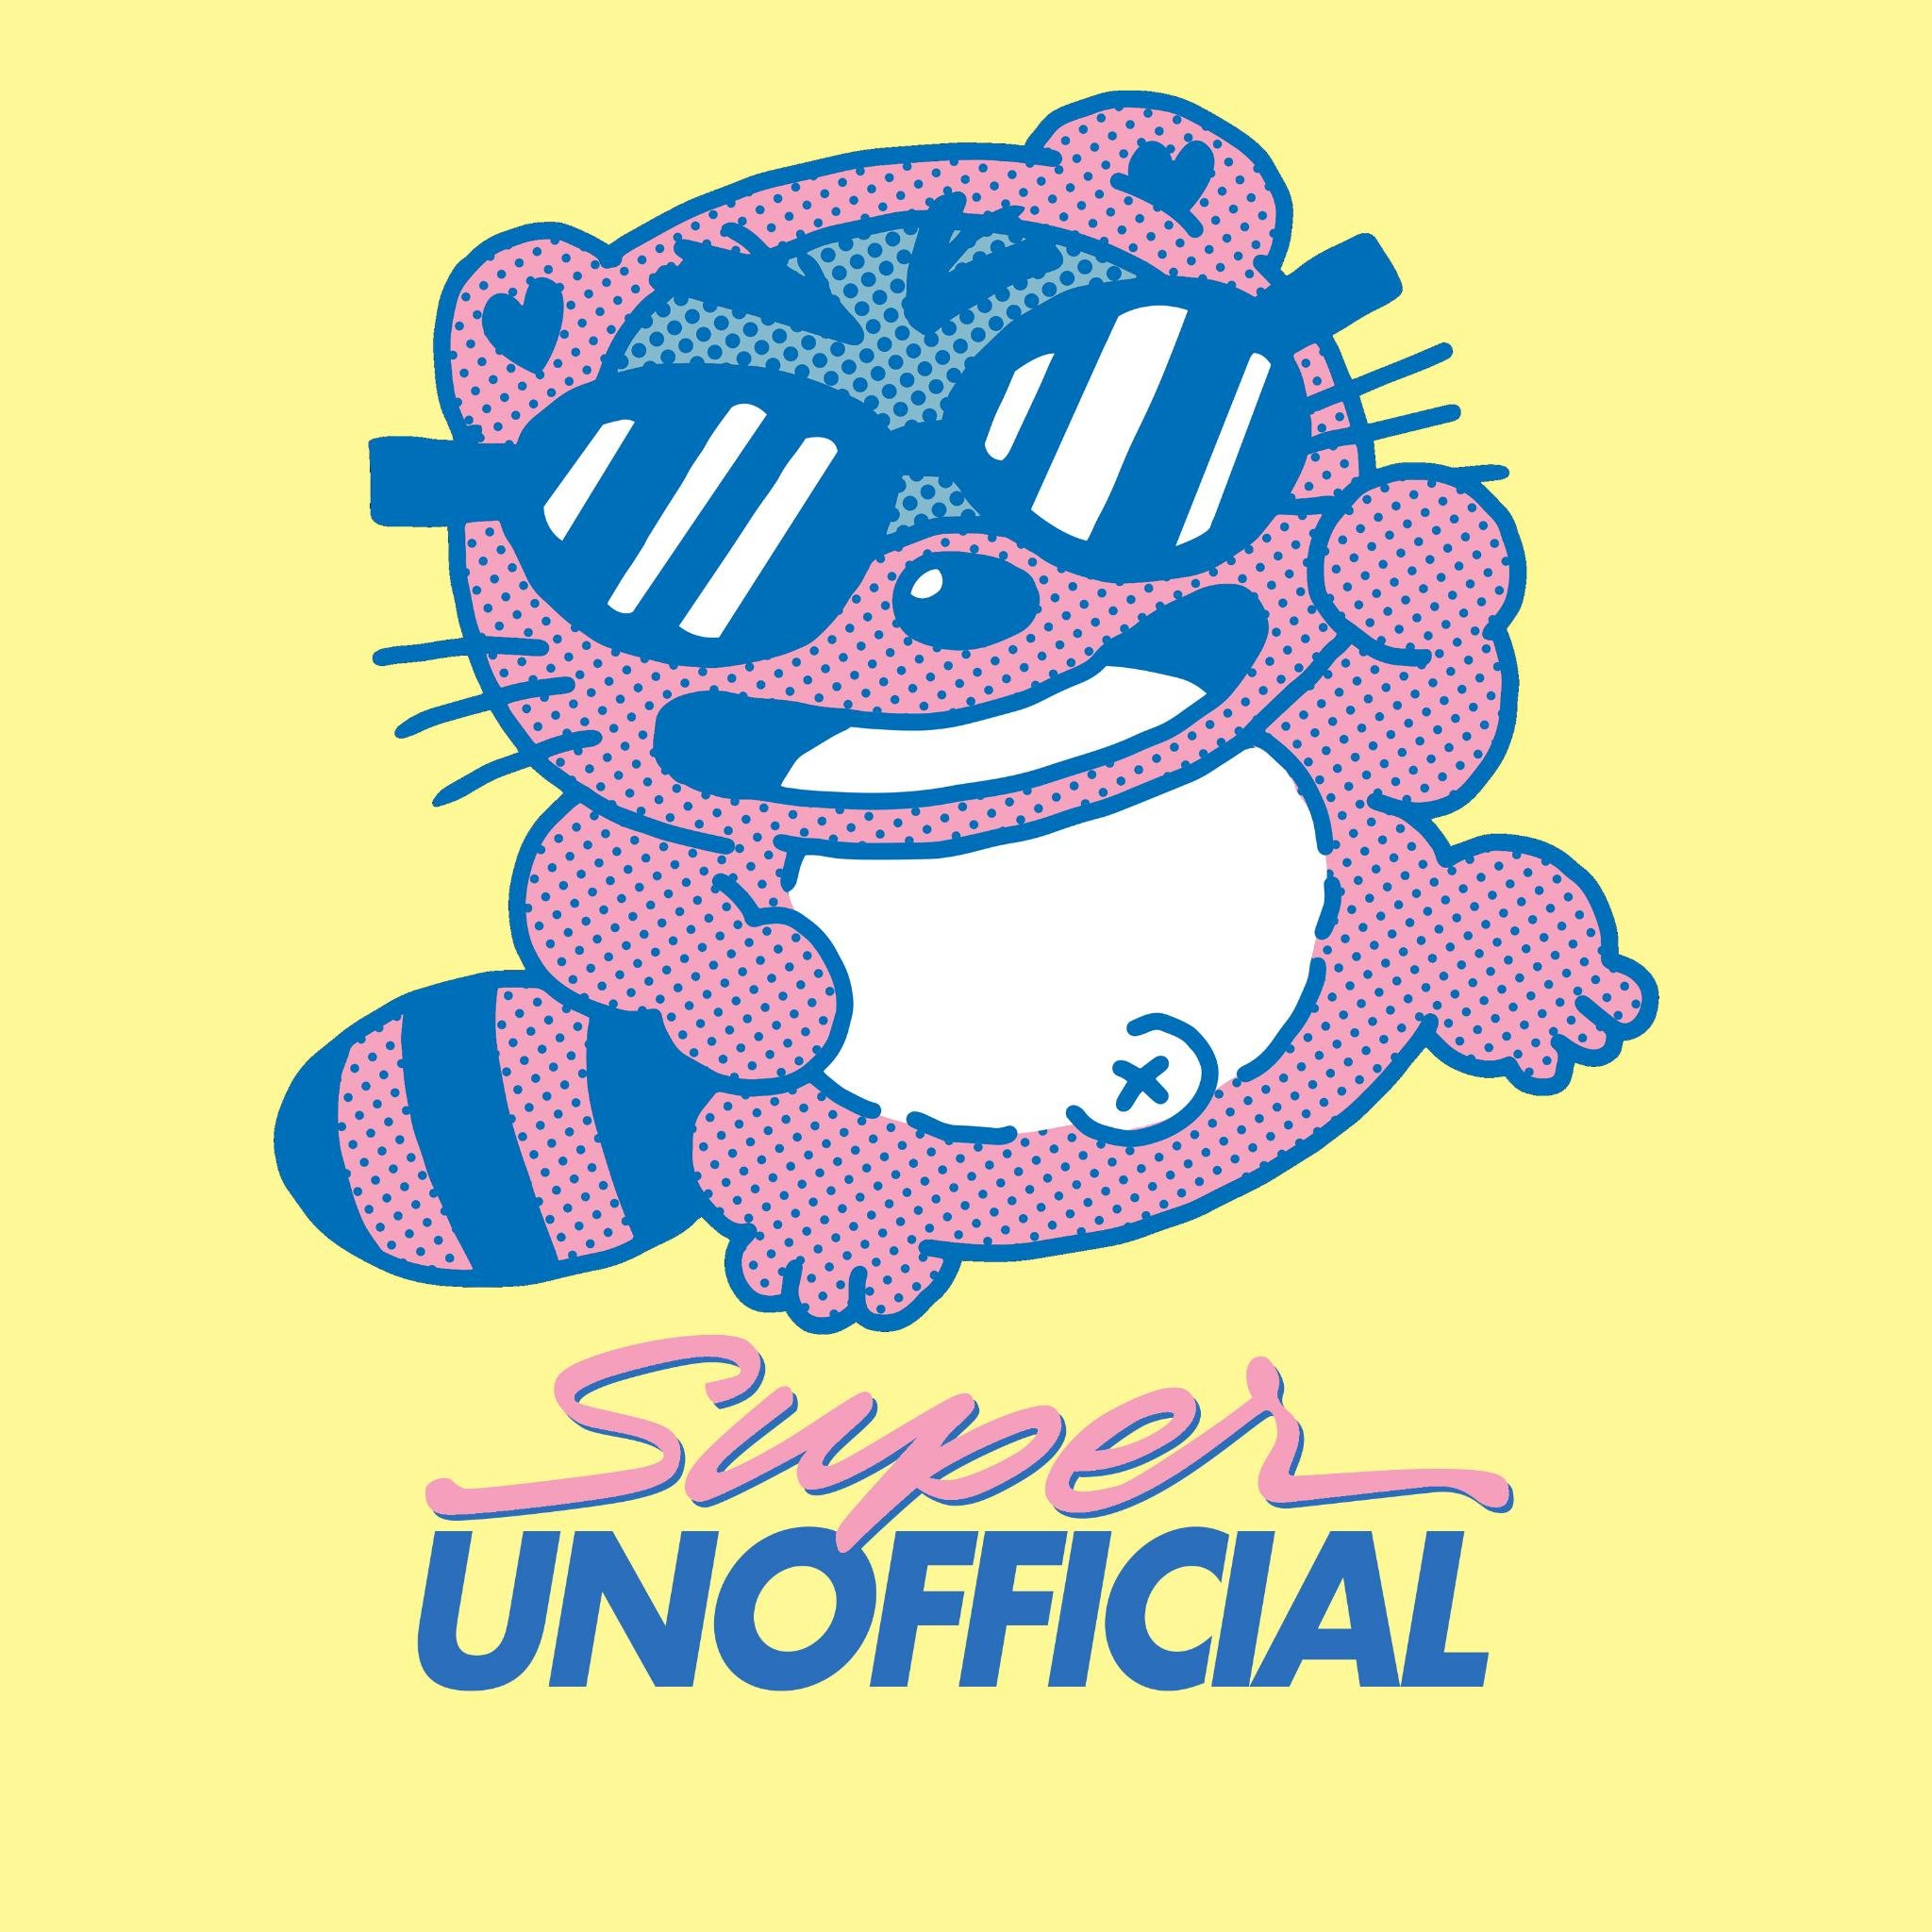 Otaku Lifestyle Brand! managed by our mascot Uno-kun! New Merch drops every Friday! ✨🌈✨💦💦💦💦 Follow us on IG (at)superunofficial